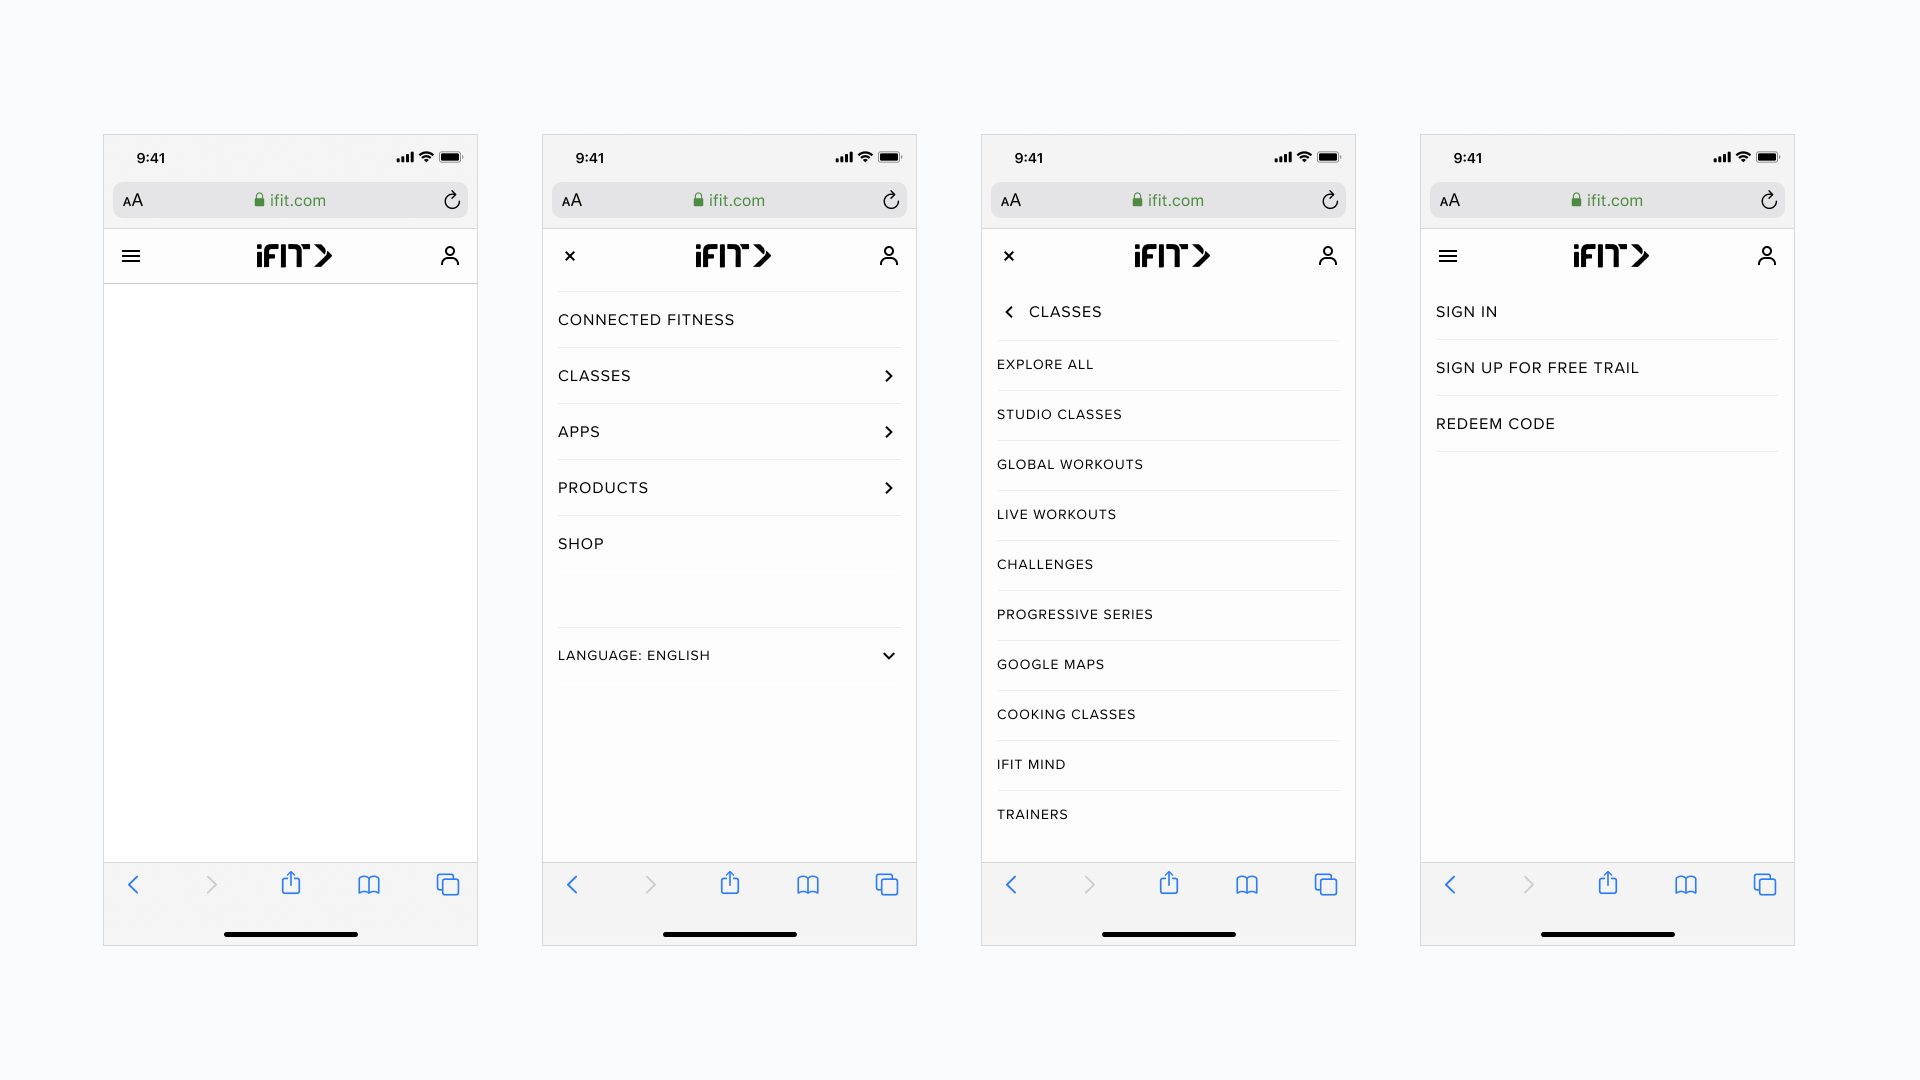 A selection of wireframes showing mobile website interface